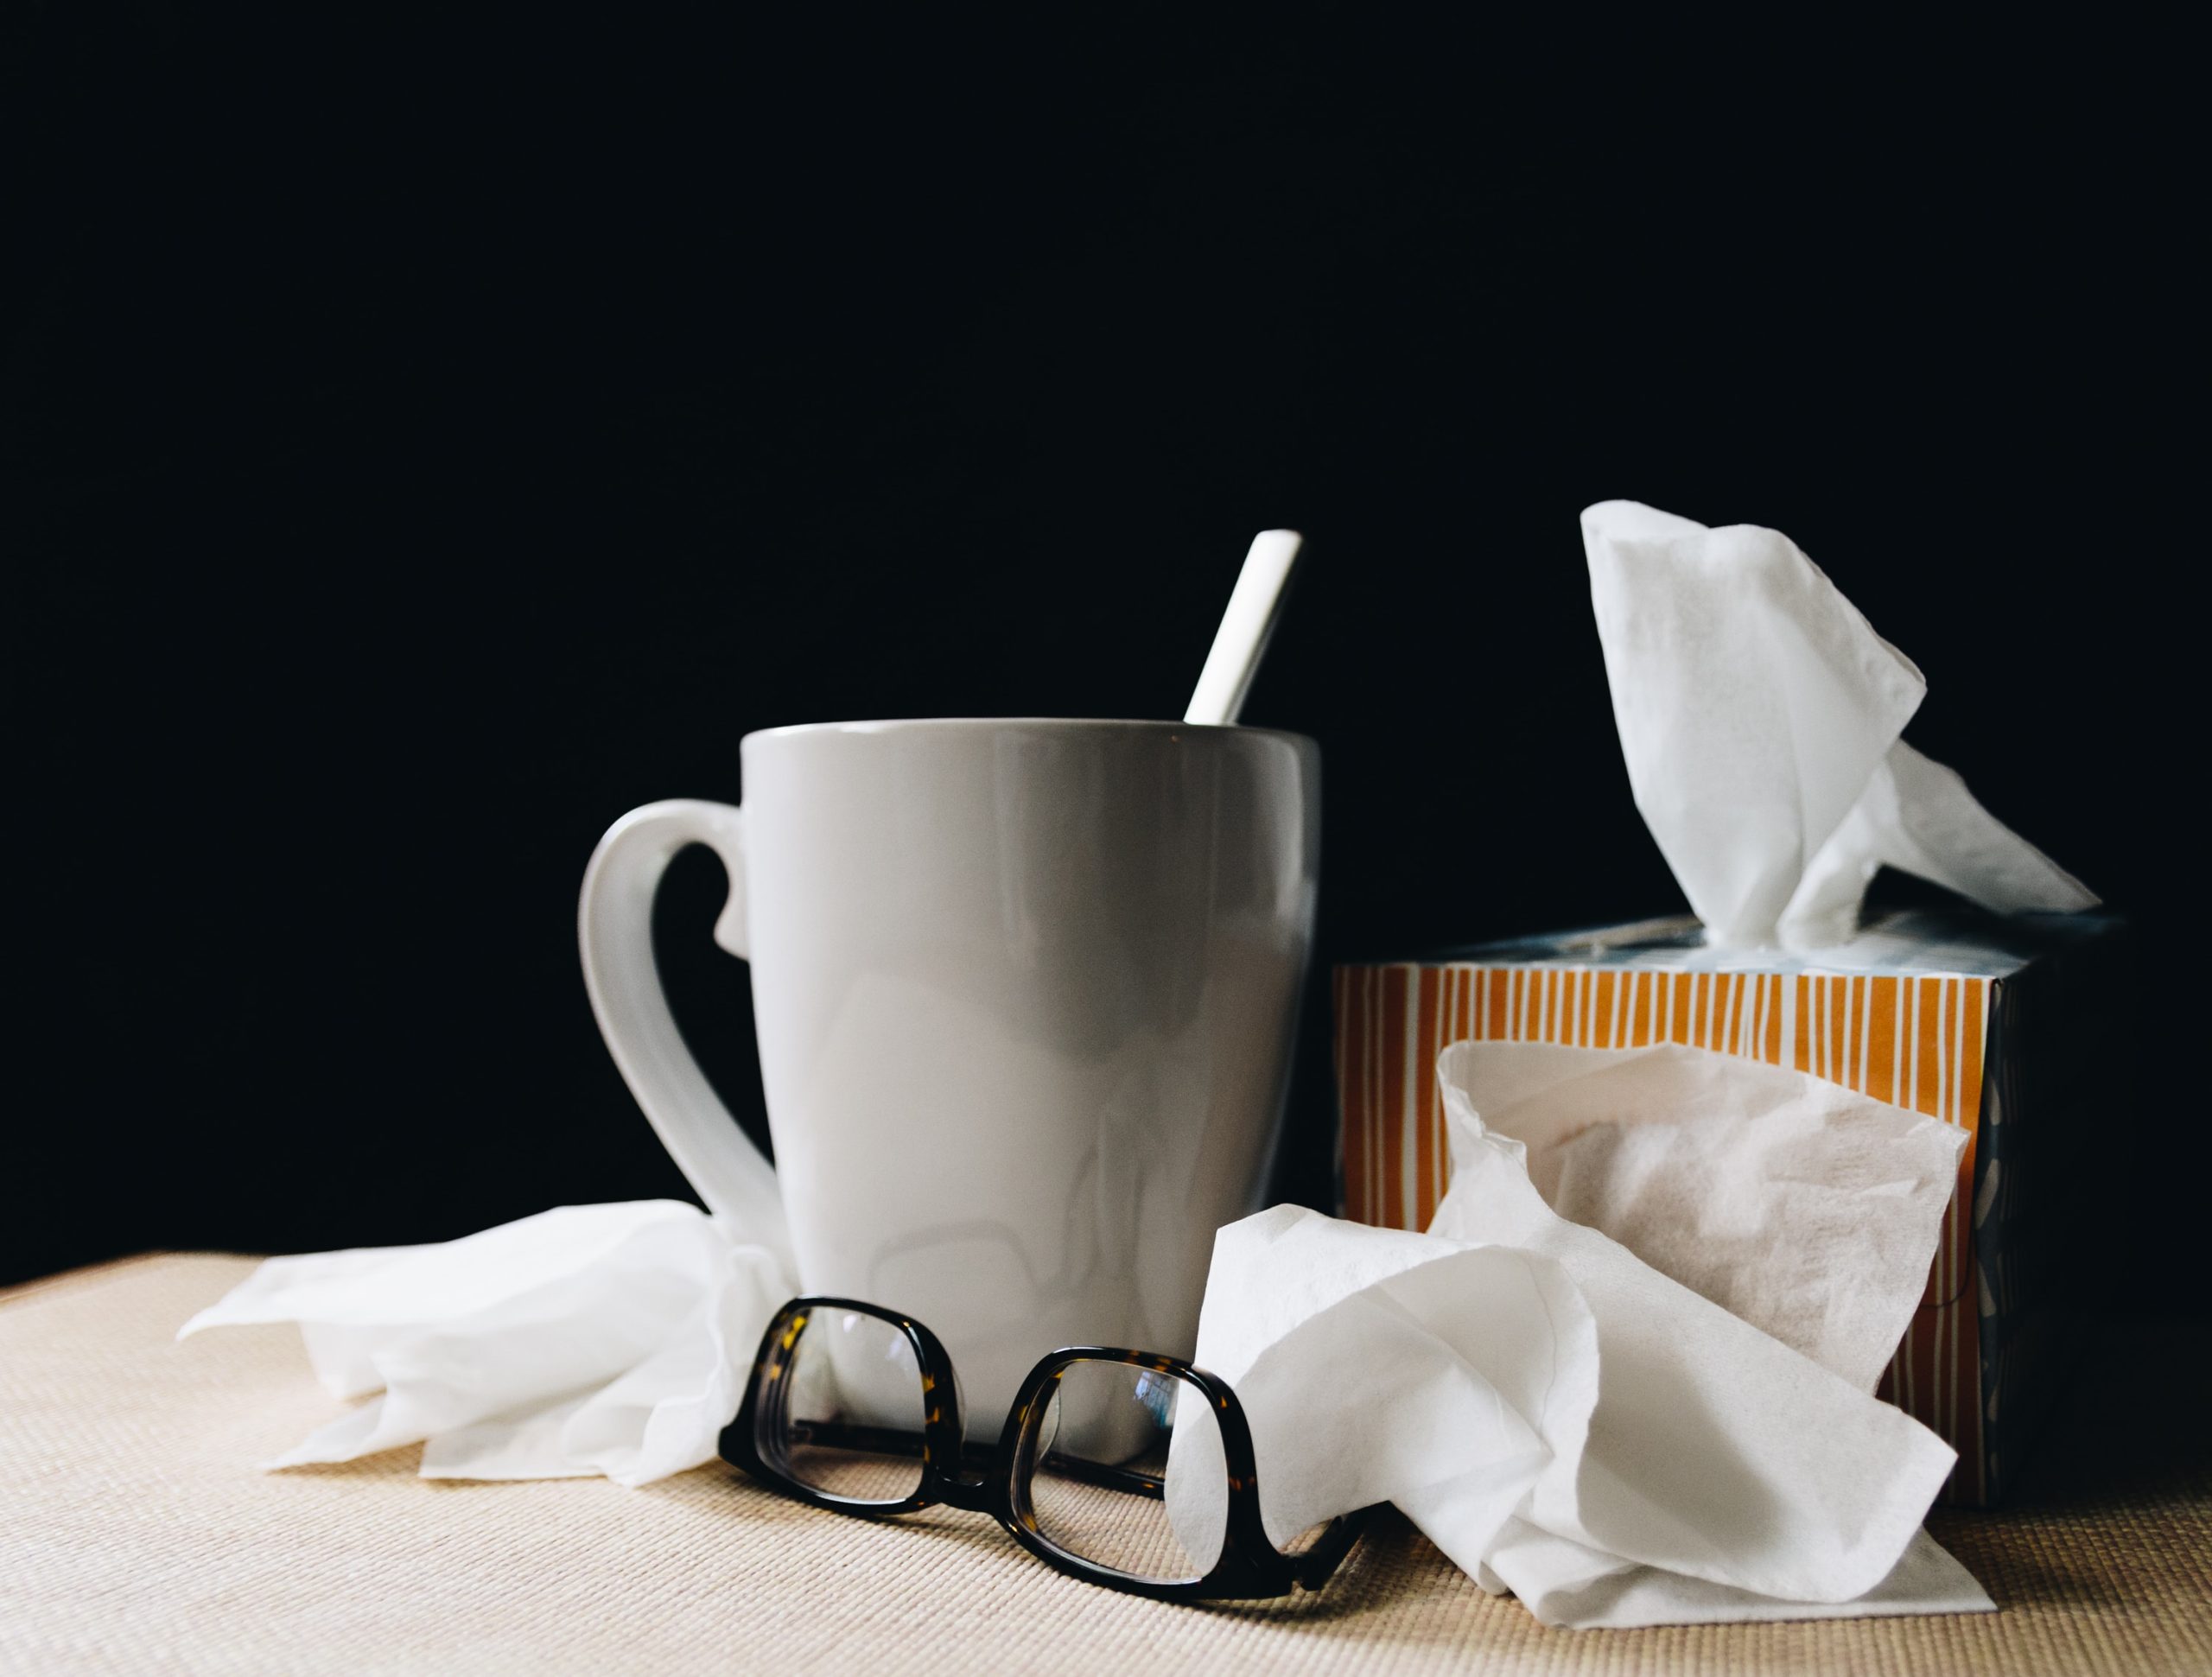 A cup, tissues, and glasses for someone who is recovering from sickness